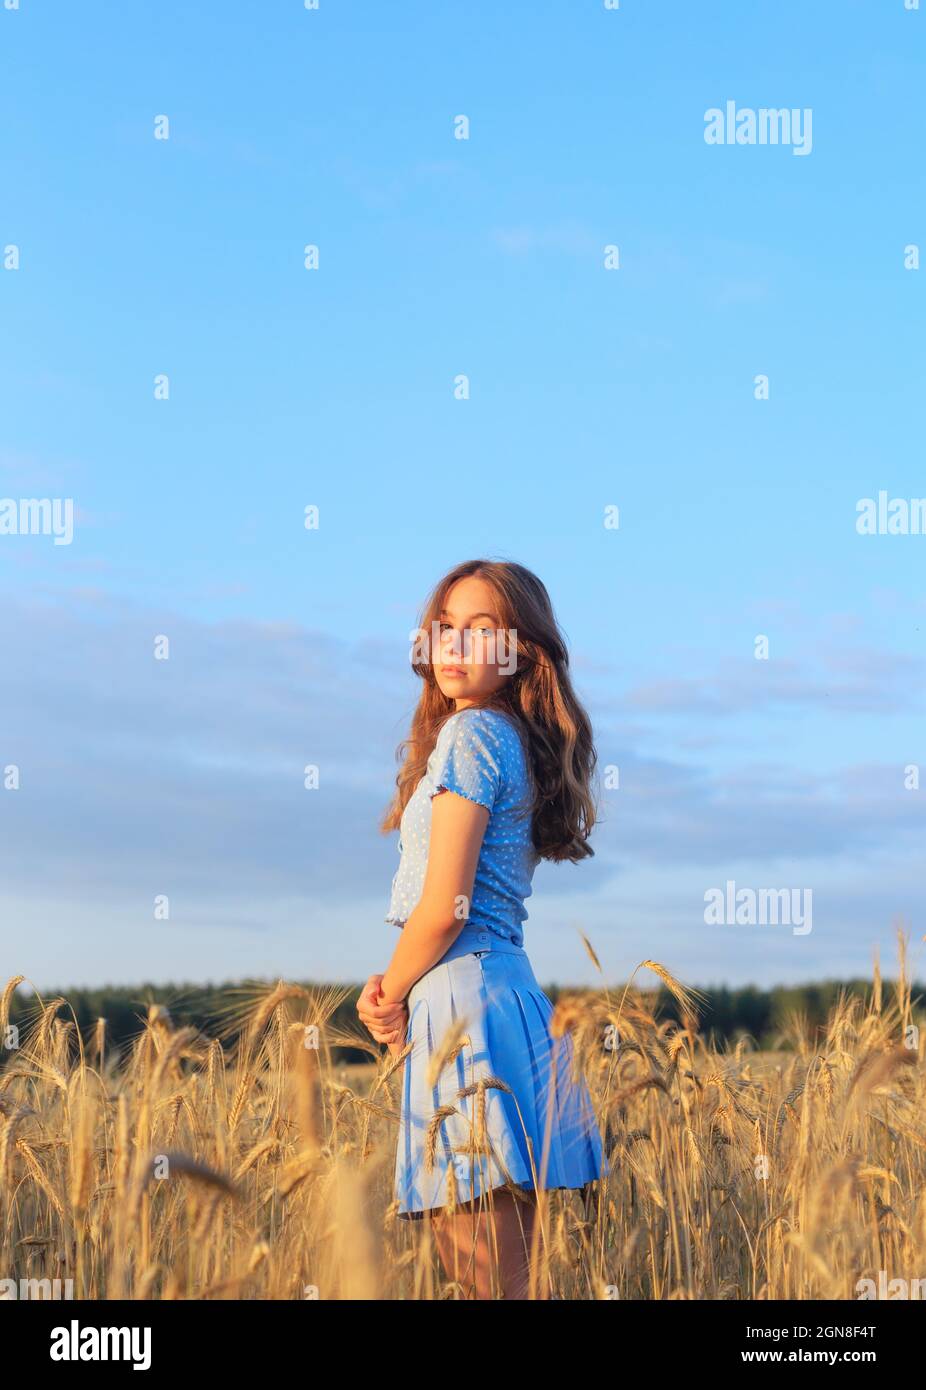 Happy young girl is smiling at wheat field, touching ears of wheat with her hand. Beautiful teenager enjoying nature in warm sunshine in a wheat field Stock Photo